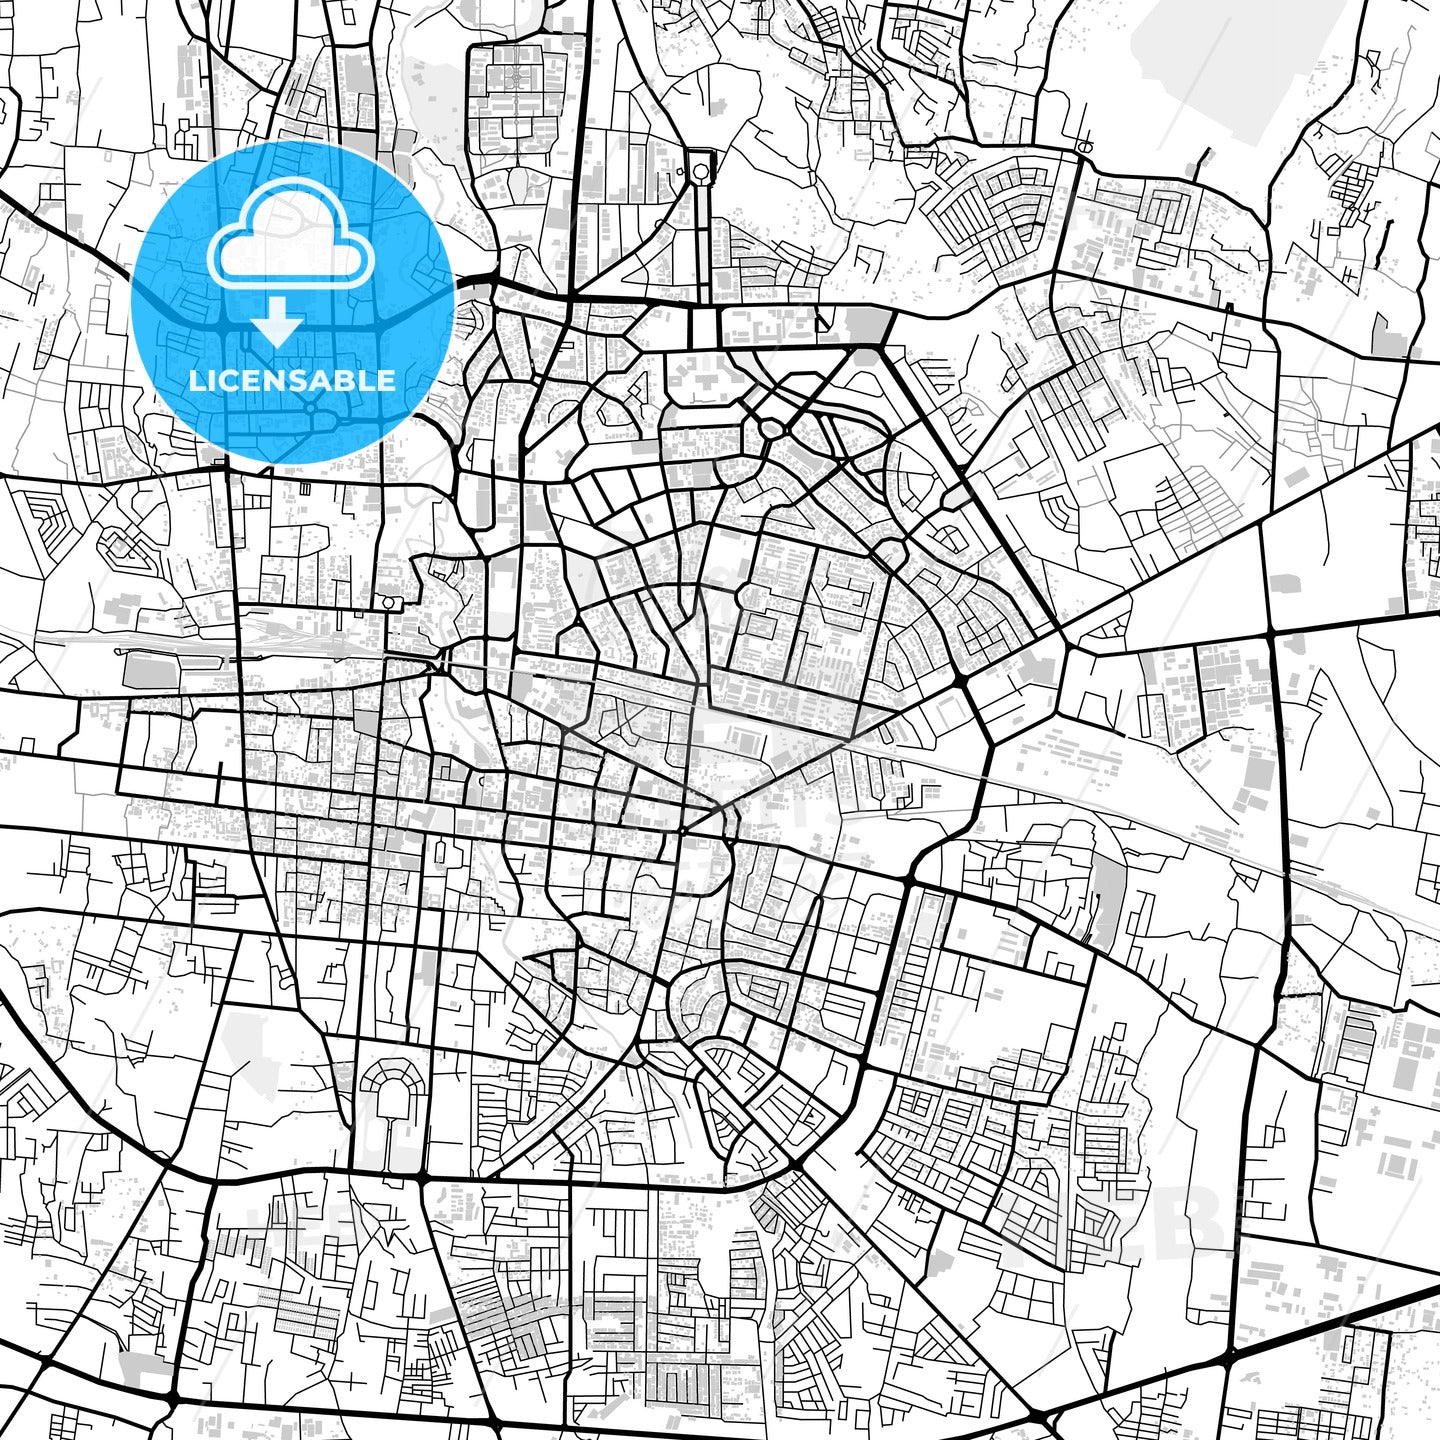 Downtown map of Bandung, West Java, Indonesia